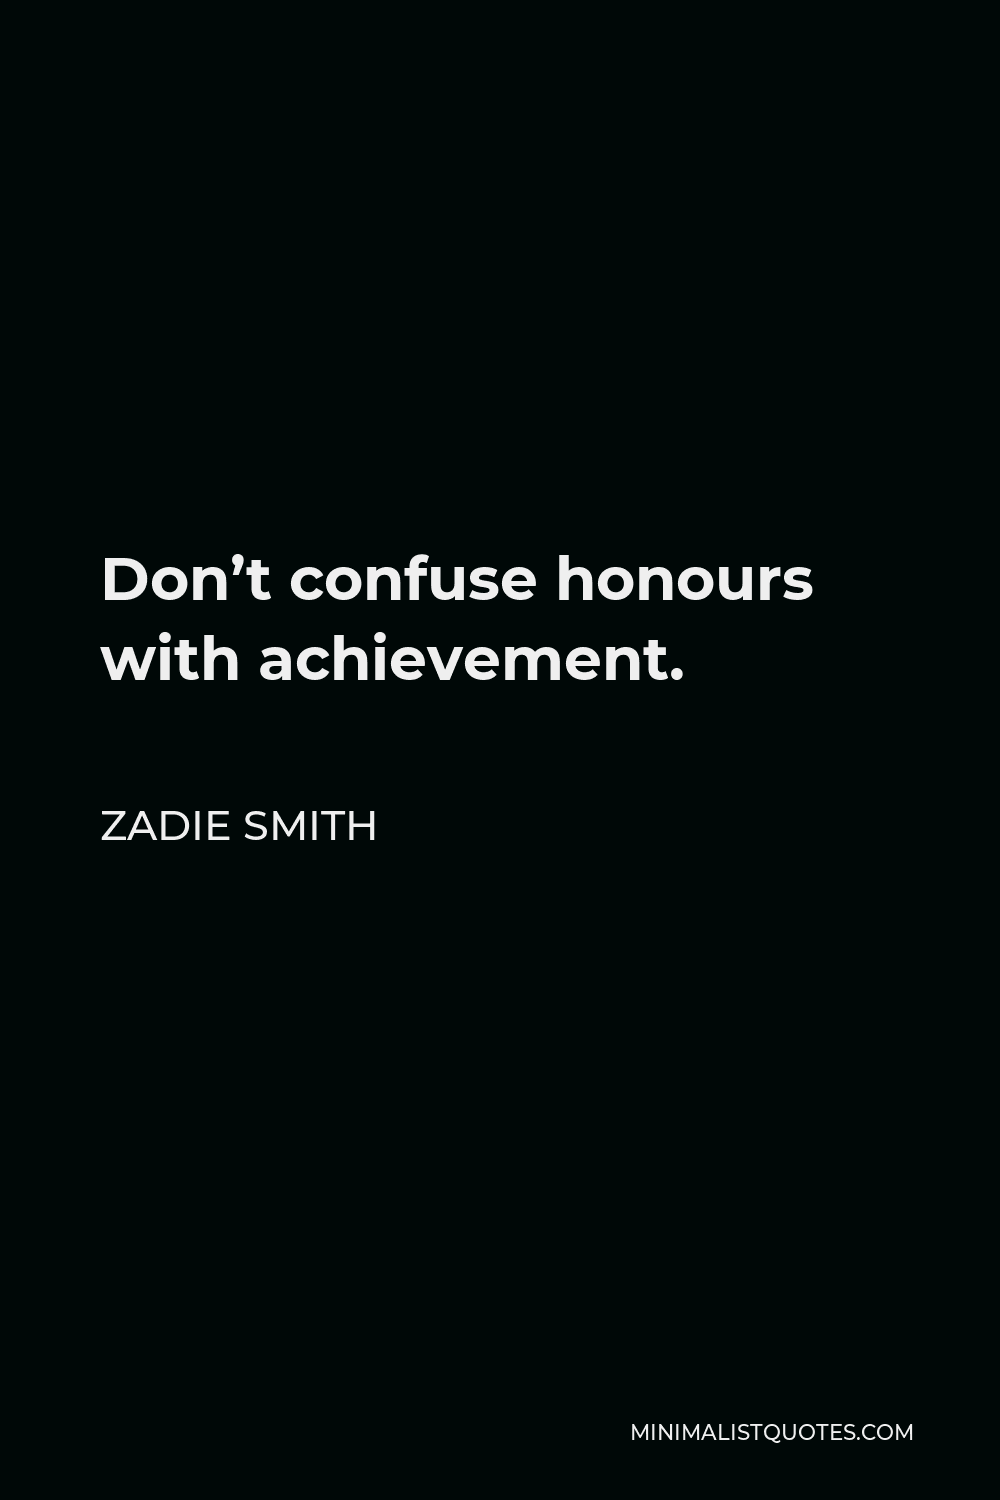 Zadie Smith Quote - Don’t confuse honours with achievement.